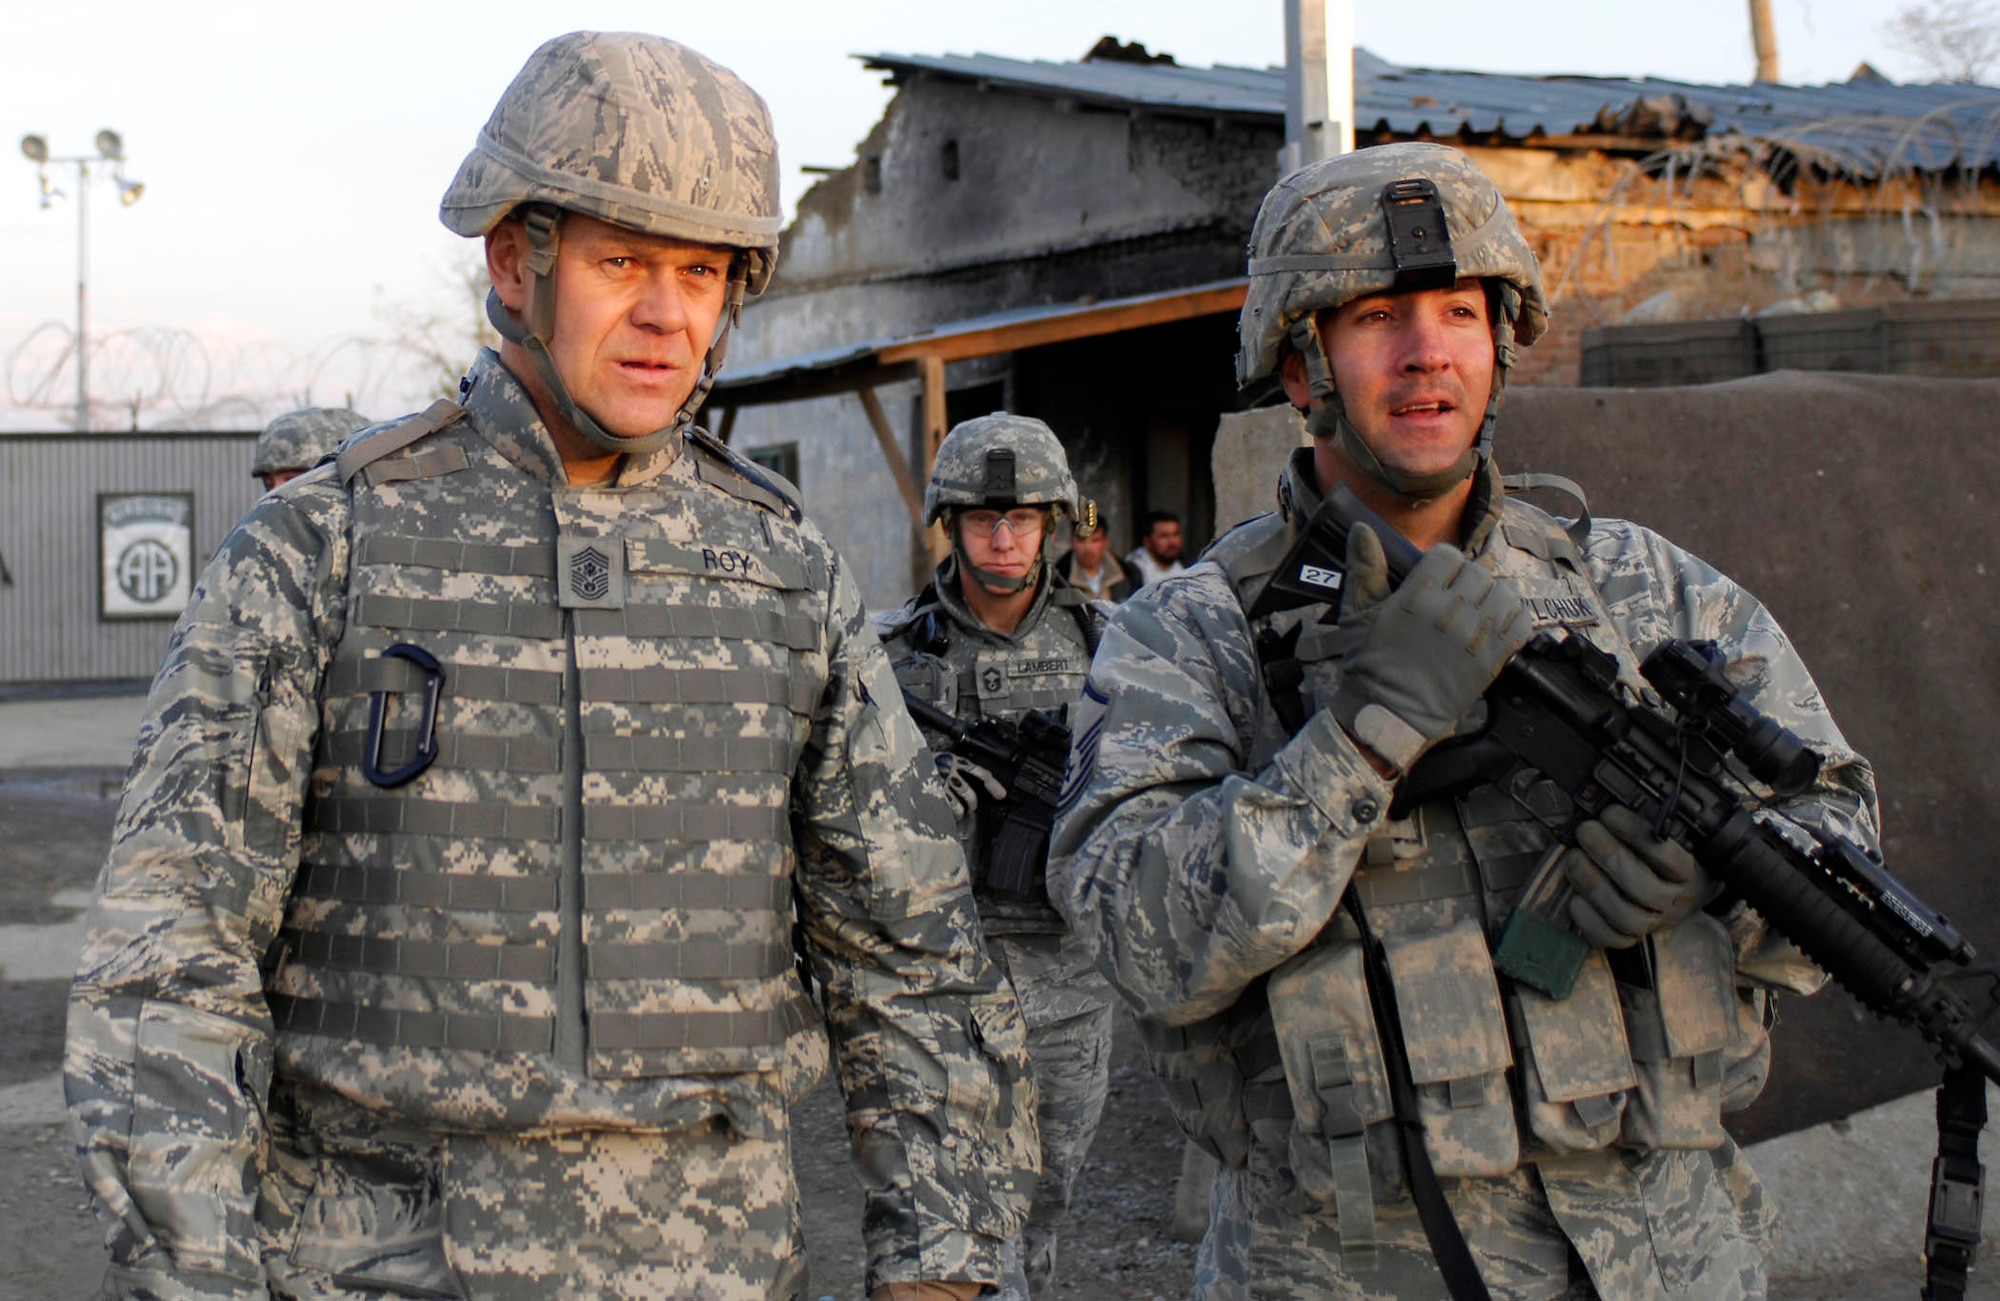 Chief Master Sgt. of the Air Force James A. Roy visits with with Master Sgt. Robert Danylchuck as they view the town outside of one of the entry points Nov. 28, 2009, outside of Bagram Airfield, Afghanistan. Sergeant Danylchuck is the 455th Expeditionary Security Forces Squadron NCO in charge of the Alpha sector and deployed from Davis-Monthan Air Force Base, Ariz. (U.S. Air Force photo/Tech. Sgt. John Jung)
